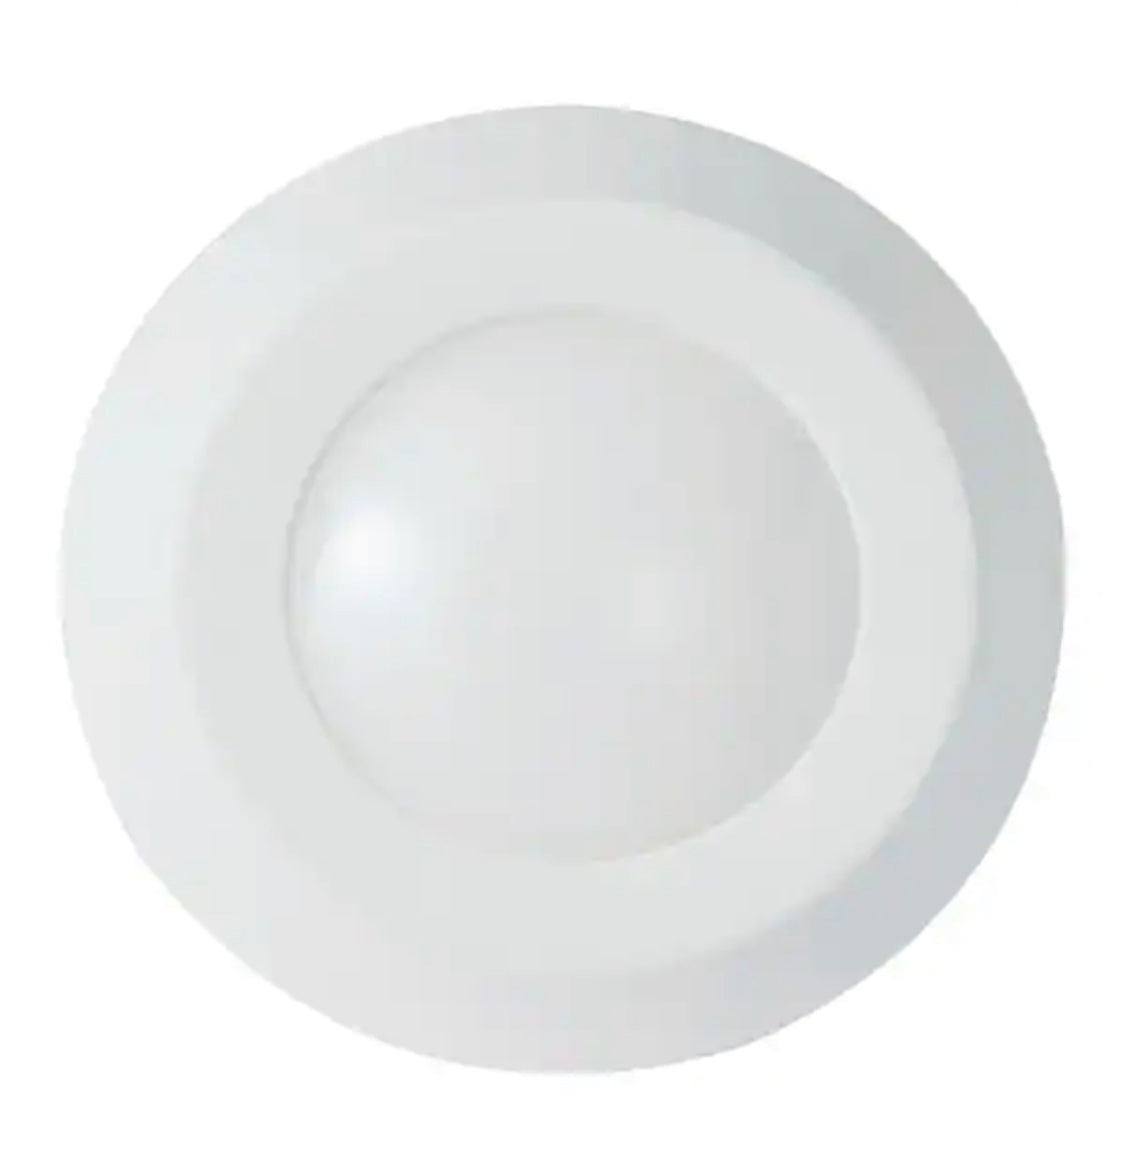 Halo BLD 4 in. White Integrated LED Recessed Ceiling Mount Light Trim 3000K Soft White - Damaged Box